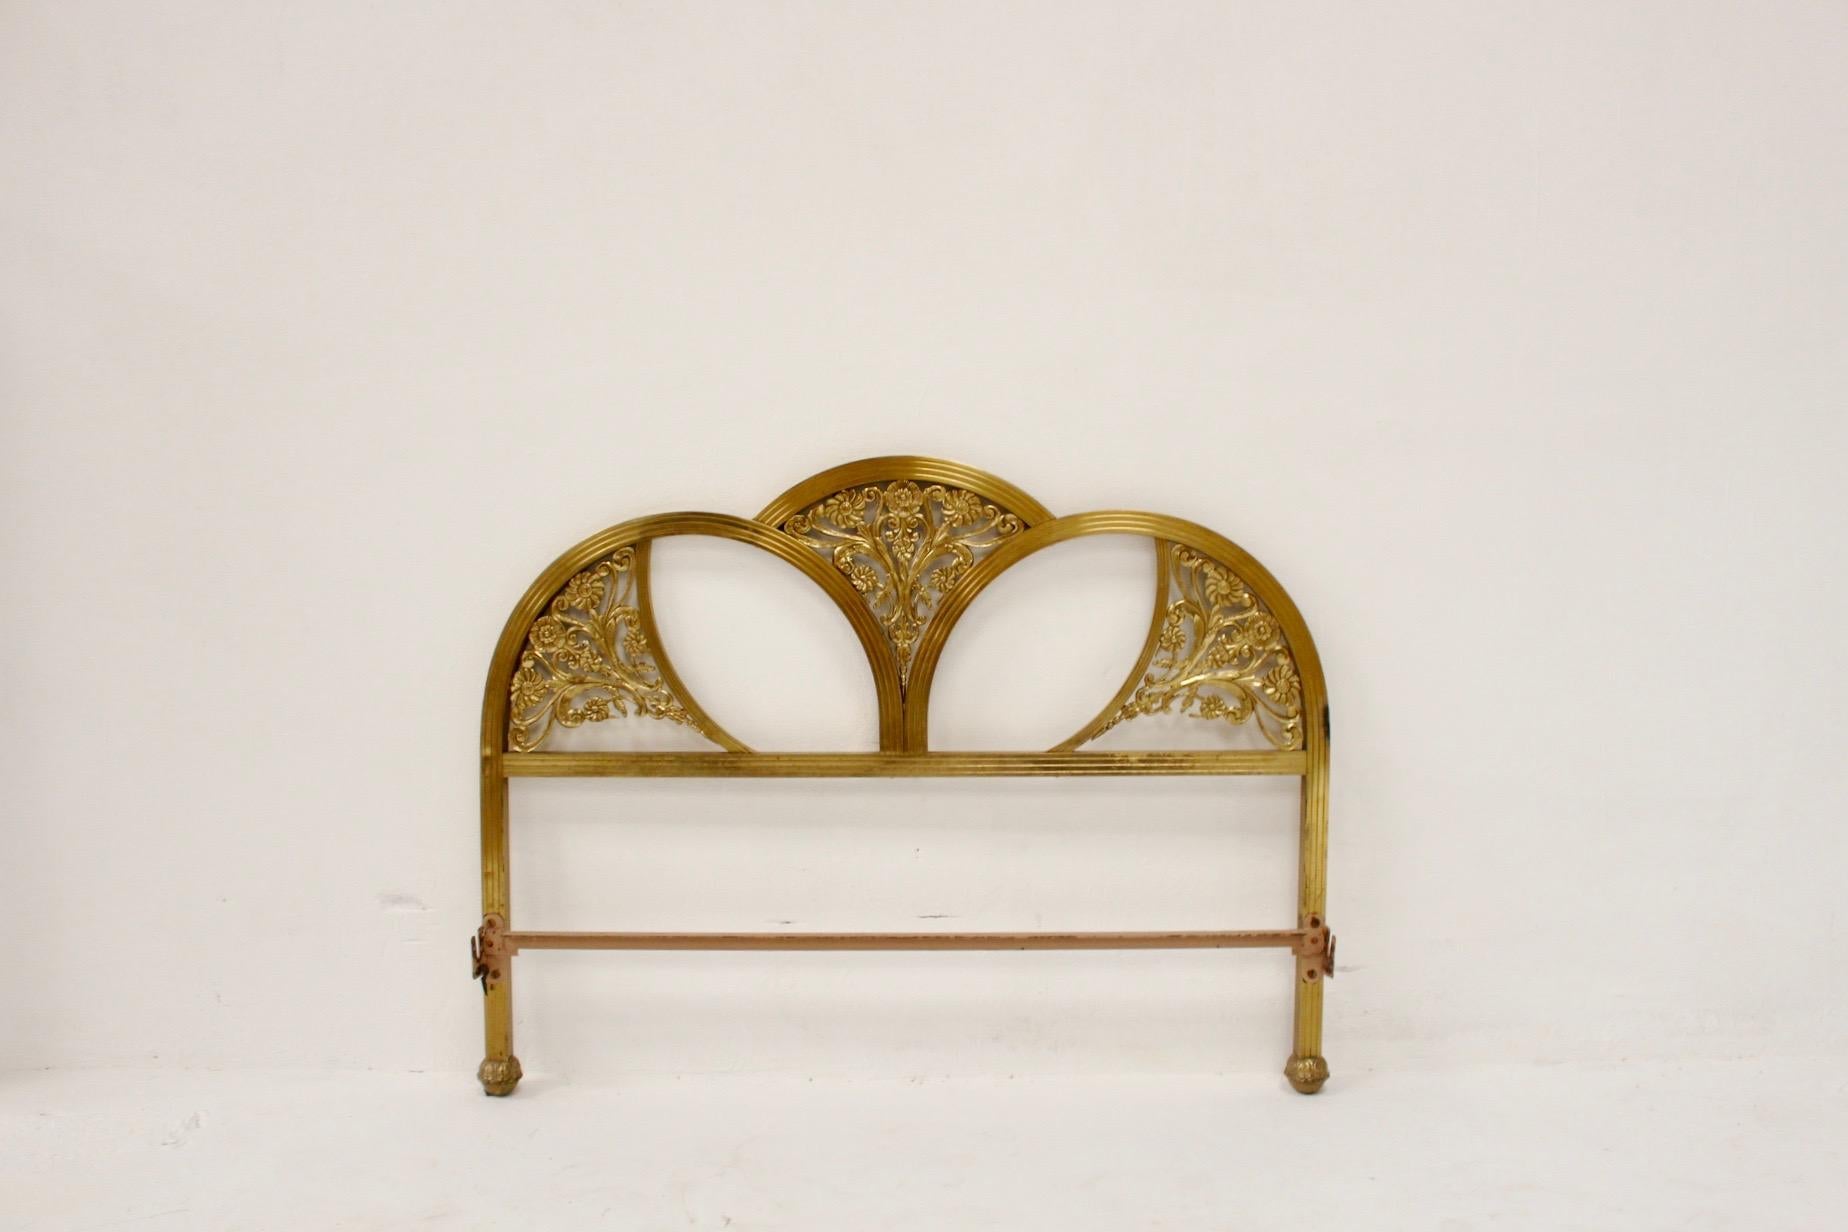 Spanish Art Deco Gold Double Bed Headboard and Foot Part, Spain, 1930s For Sale